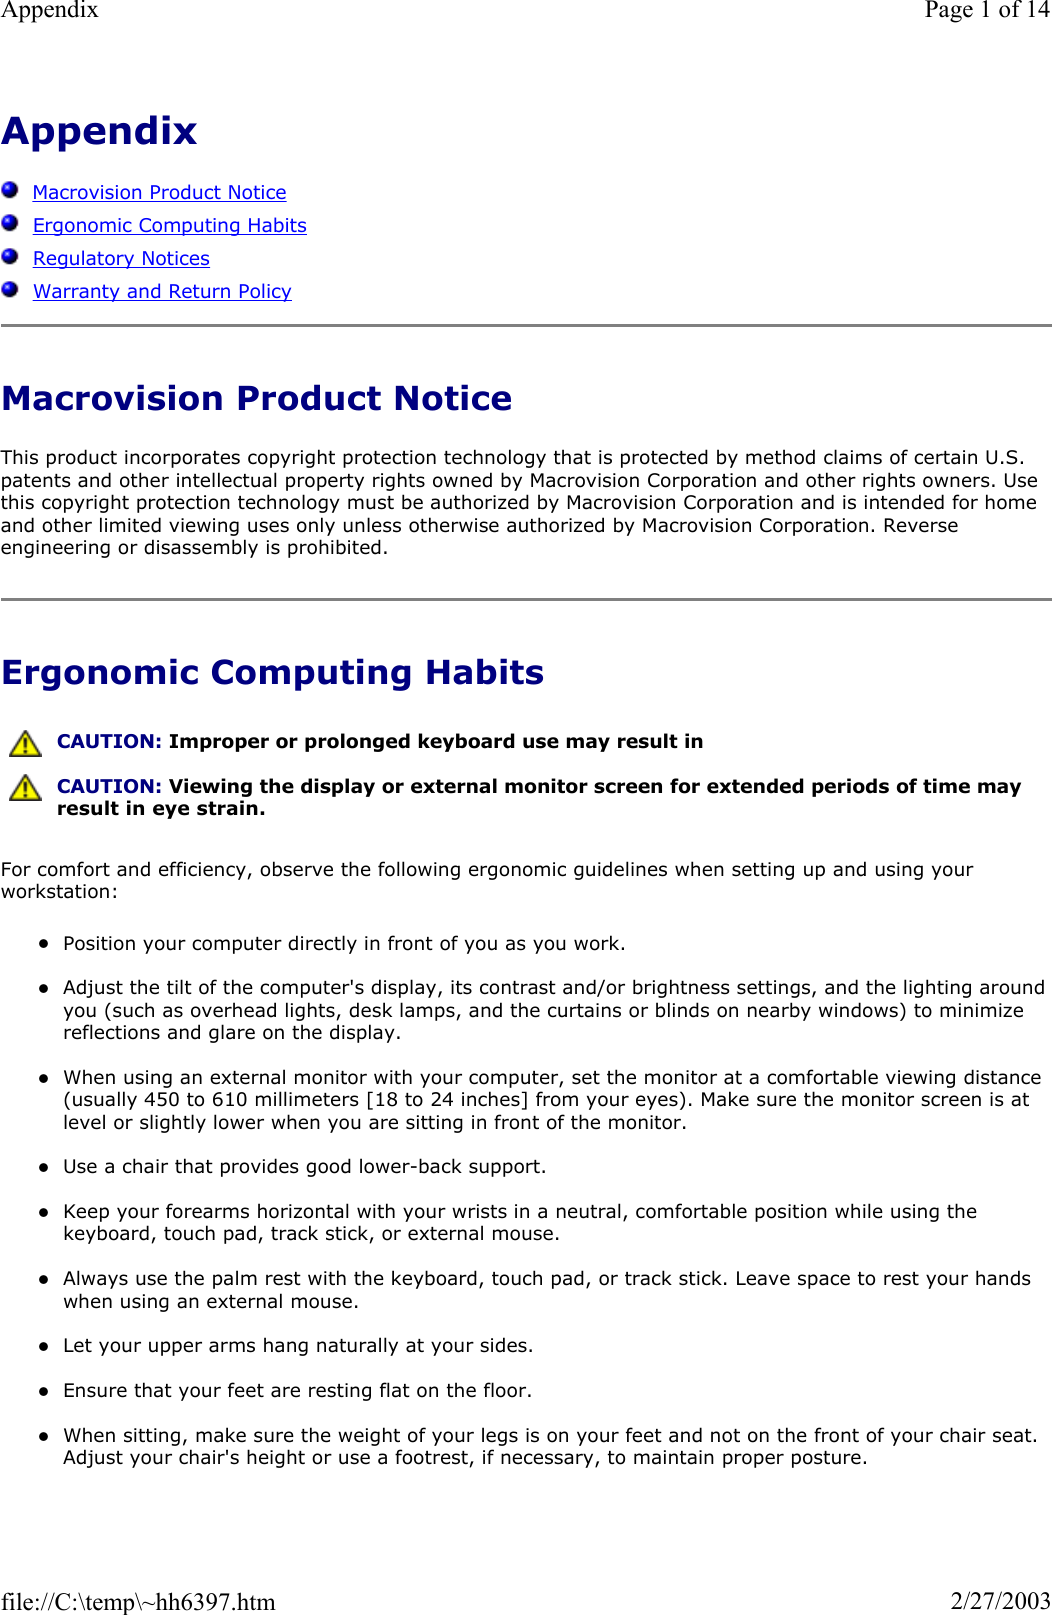 AppendixMacrovision Product NoticeErgonomic Computing HabitsRegulatory NoticesWarranty and Return PolicyMacrovision Product Notice This product incorporates copyright protection technology that is protected by method claims of certain U.S. patents and other intellectual property rights owned by Macrovision Corporation and other rights owners. Use this copyright protection technology must be authorized by Macrovision Corporation and is intended for home and other limited viewing uses only unless otherwise authorized by Macrovision Corporation. Reverse engineering or disassembly is prohibited. Ergonomic Computing Habits For comfort and efficiency, observe the following ergonomic guidelines when setting up and using your workstation: zPosition your computer directly in front of you as you work. zAdjust the tilt of the computer&apos;s display, its contrast and/or brightness settings, and the lighting around you (such as overhead lights, desk lamps, and the curtains or blinds on nearby windows) to minimize reflections and glare on the display. zWhen using an external monitor with your computer, set the monitor at a comfortable viewing distance (usually 450 to 610 millimeters [18 to 24 inches] from your eyes). Make sure the monitor screen is at level or slightly lower when you are sitting in front of the monitor.  zUse a chair that provides good lower-back support. zKeep your forearms horizontal with your wrists in a neutral, comfortable position while using the keyboard, touch pad, track stick, or external mouse. zAlways use the palm rest with the keyboard, touch pad, or track stick. Leave space to rest your hands when using an external mouse. zLet your upper arms hang naturally at your sides. zEnsure that your feet are resting flat on the floor. zWhen sitting, make sure the weight of your legs is on your feet and not on the front of your chair seat. Adjust your chair&apos;s height or use a footrest, if necessary, to maintain proper posture. CAUTION: Improper or prolonged keyboard use may result in CAUTION: Viewing the display or external monitor screen for extended periods of time may result in eye strain.Page 1 of 14Appendix2/27/2003file://C:\temp\~hh6397.htm